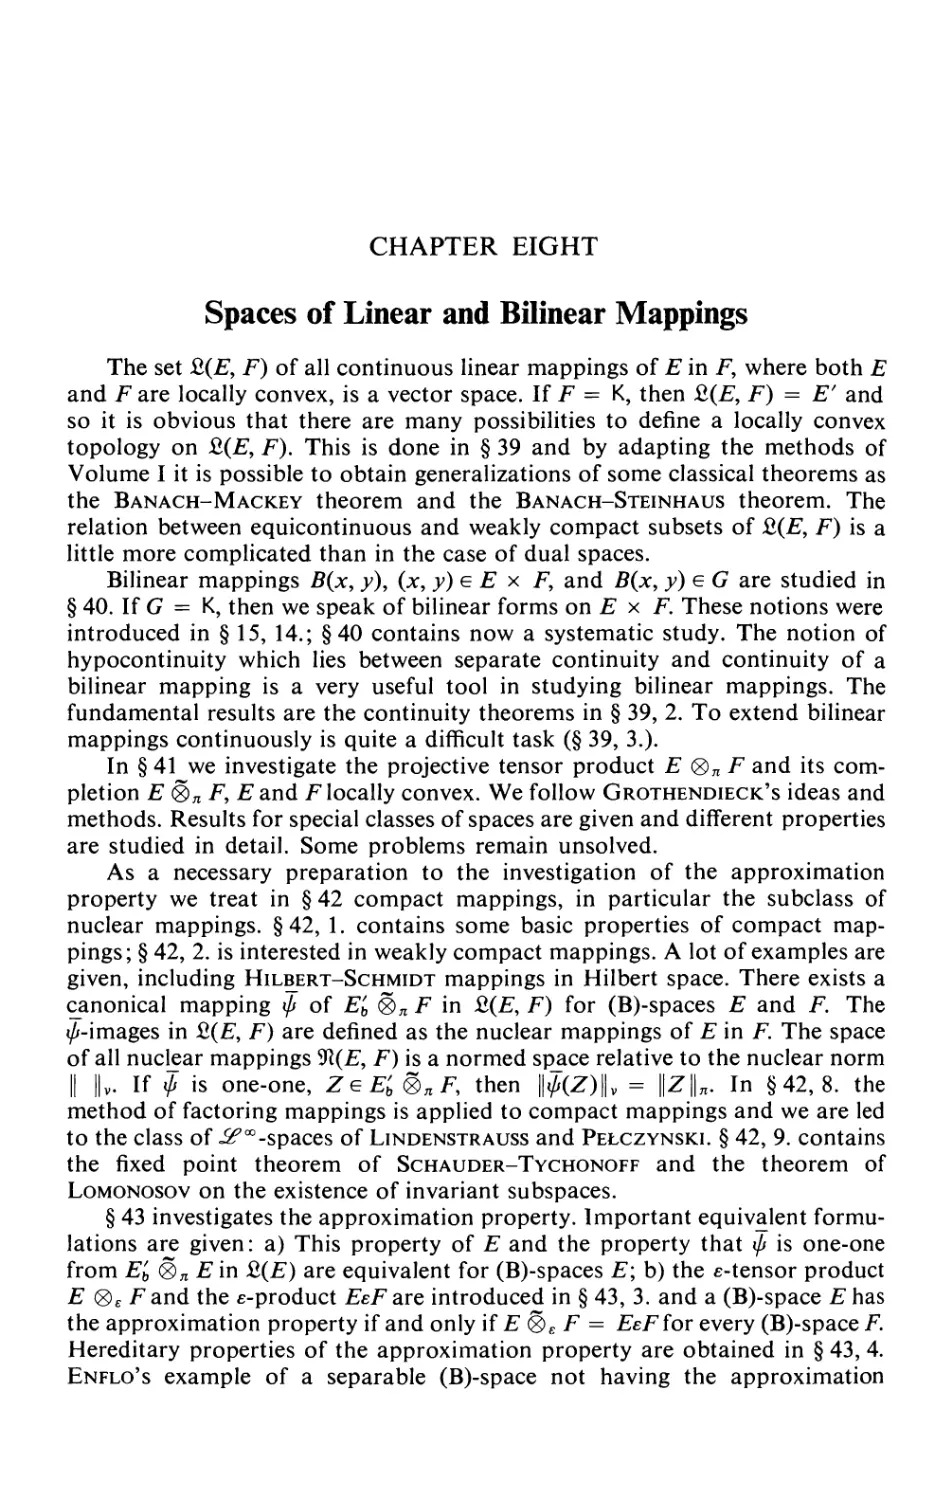 Chapter Eight - Spaces of Linear and Bilinear Mappings